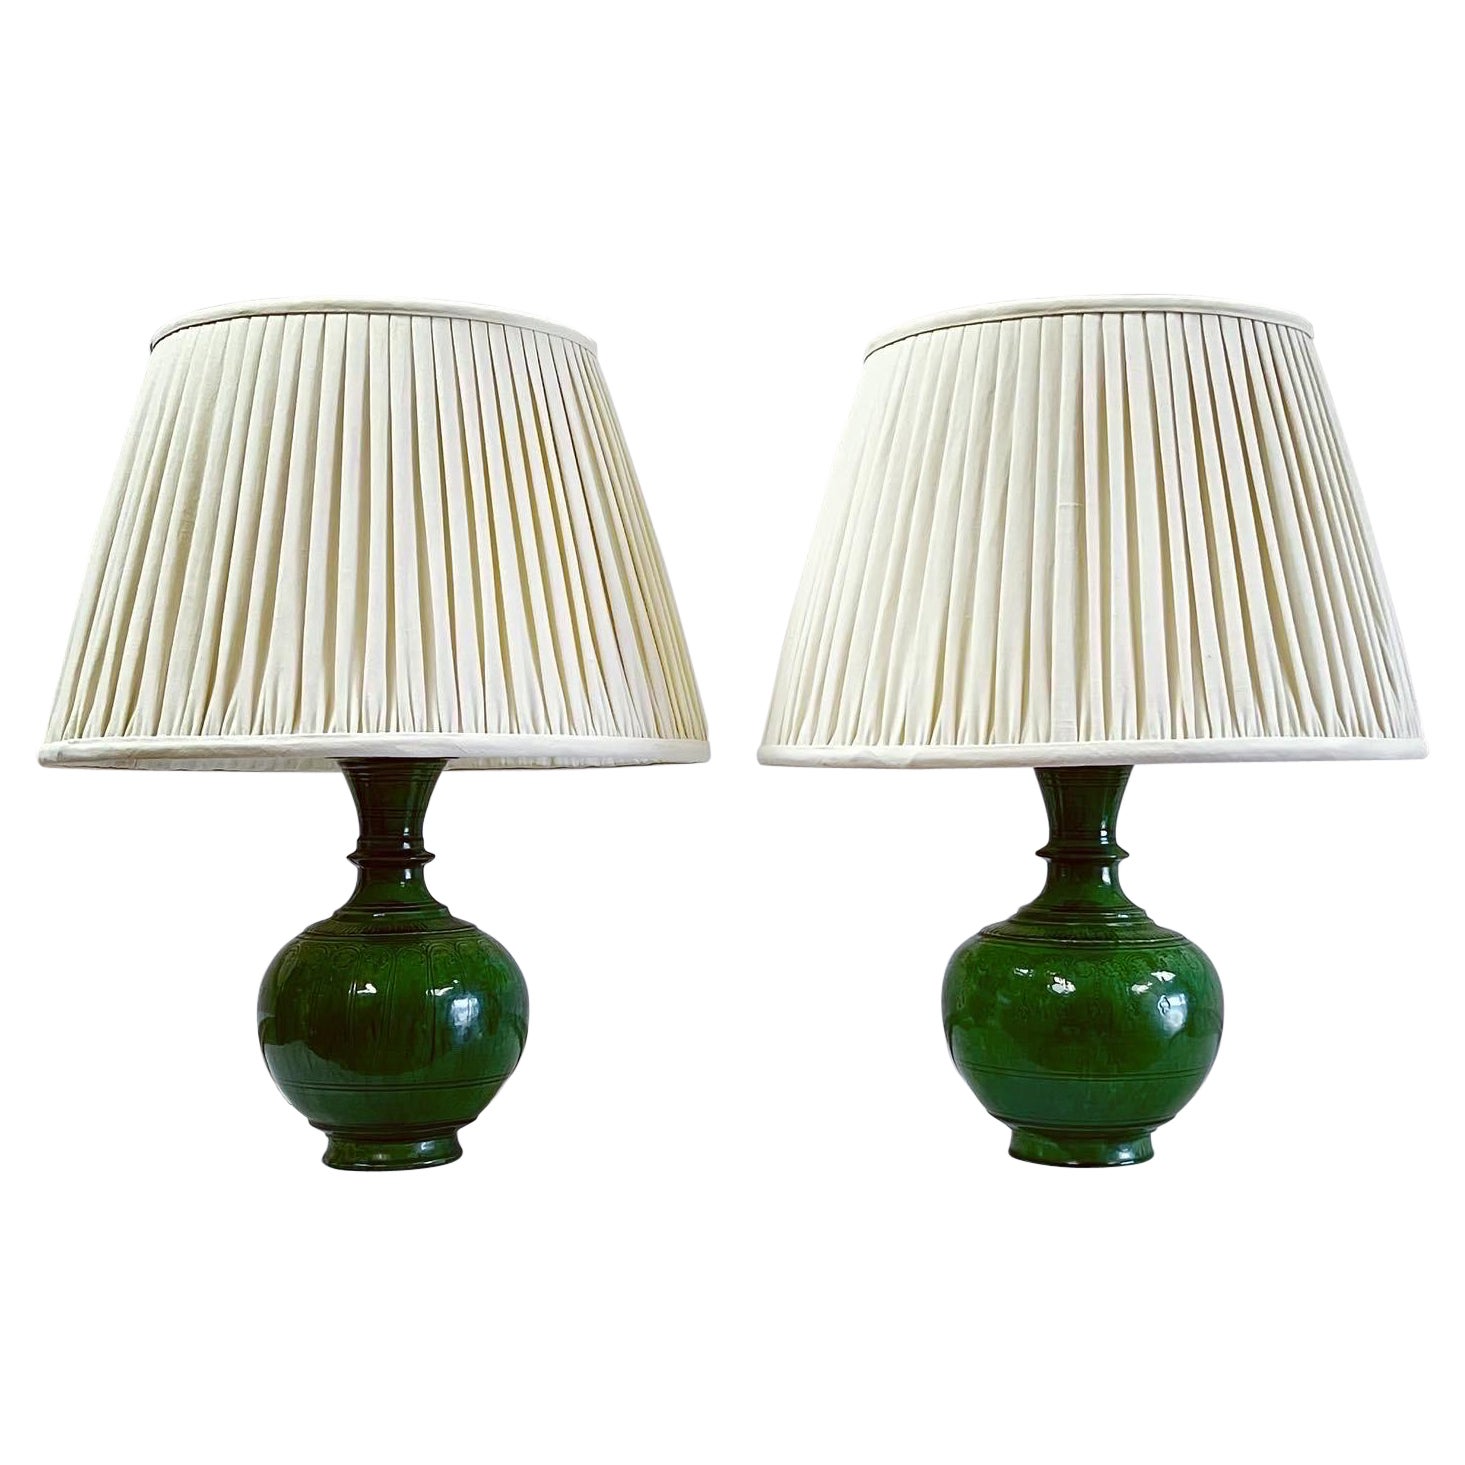 A Pair of Persian Green Glazed Ceramic Lamps For Sale